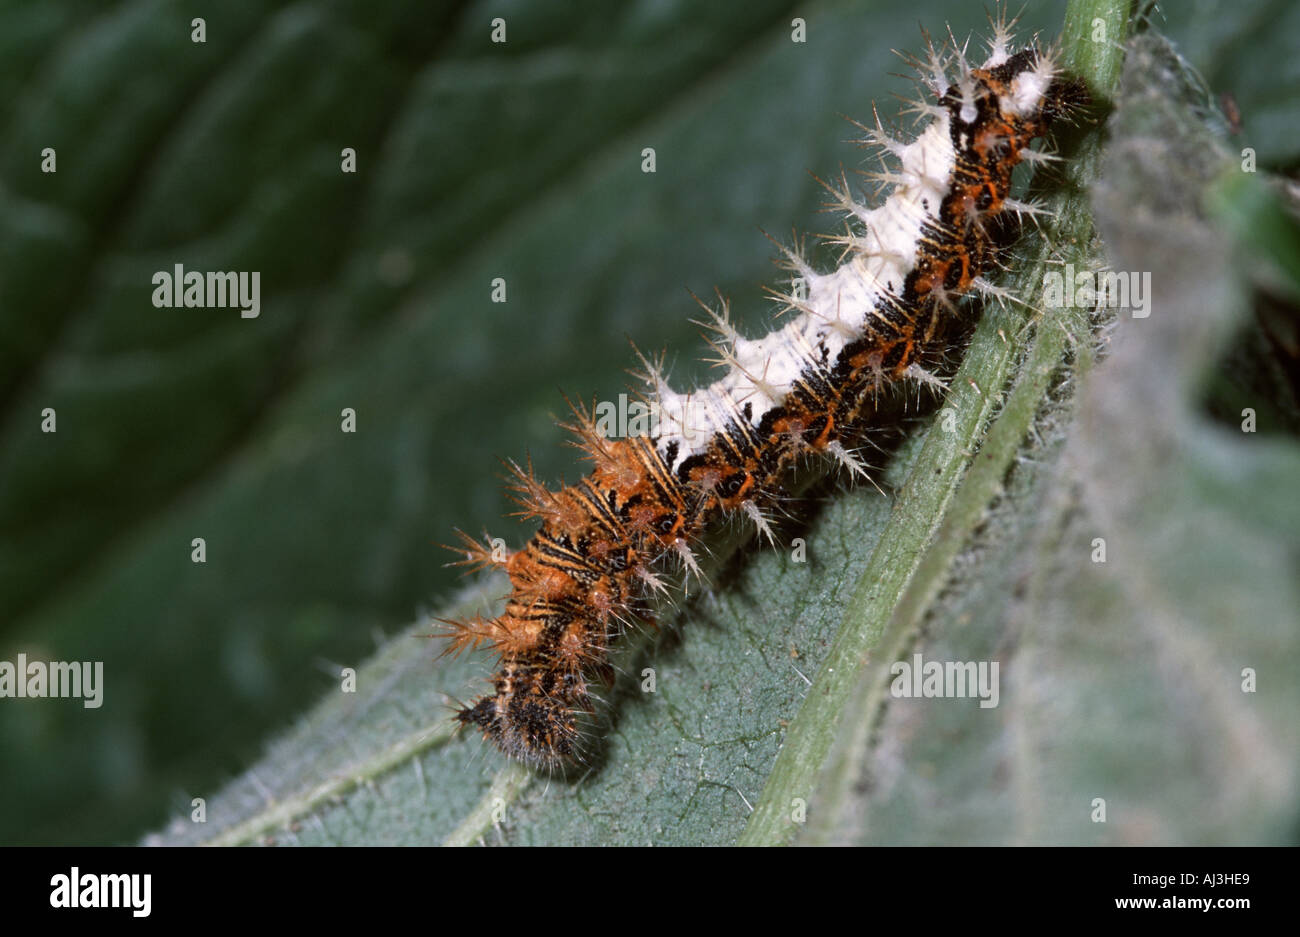 Caterpillar of the Comma Butterfly (Polygonia c-album), Pyrenees, Spain Stock Photo